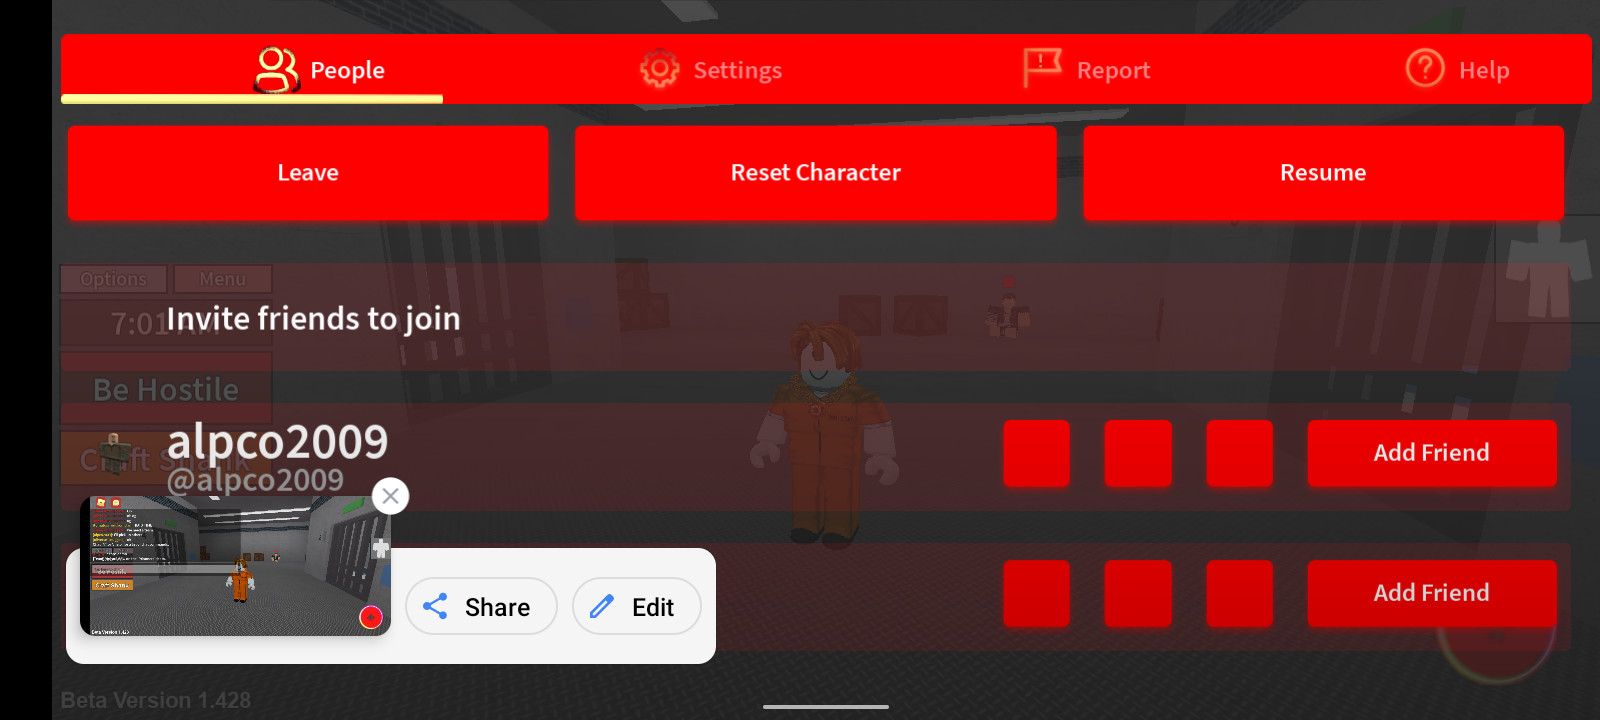 Roblox Lite for Android - Free App Download